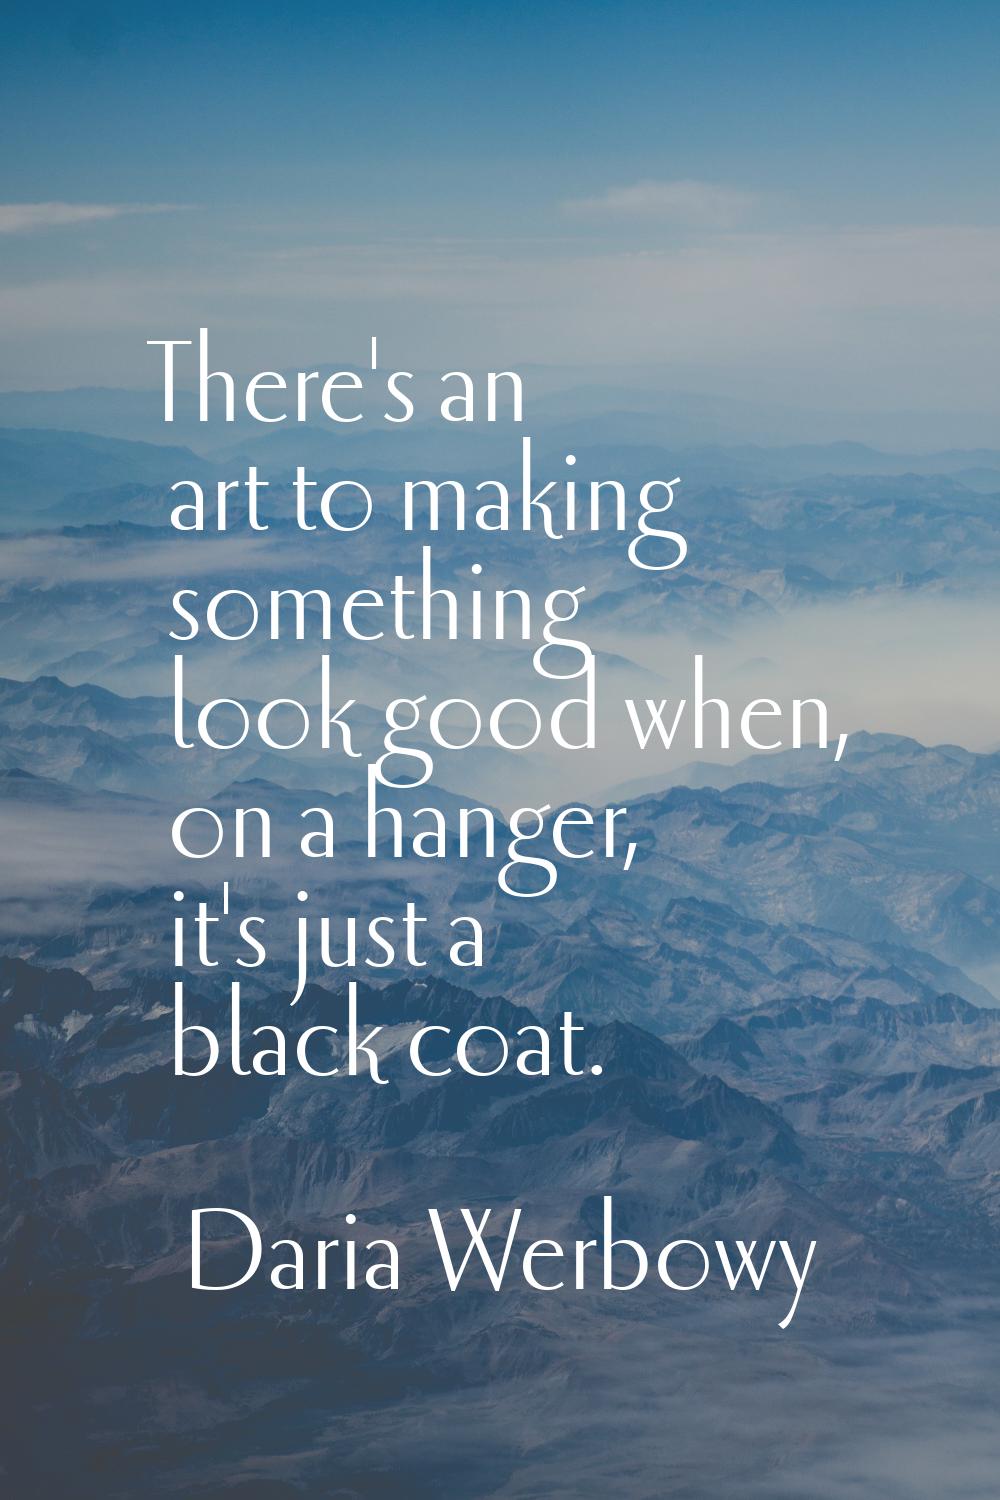 There's an art to making something look good when, on a hanger, it's just a black coat.